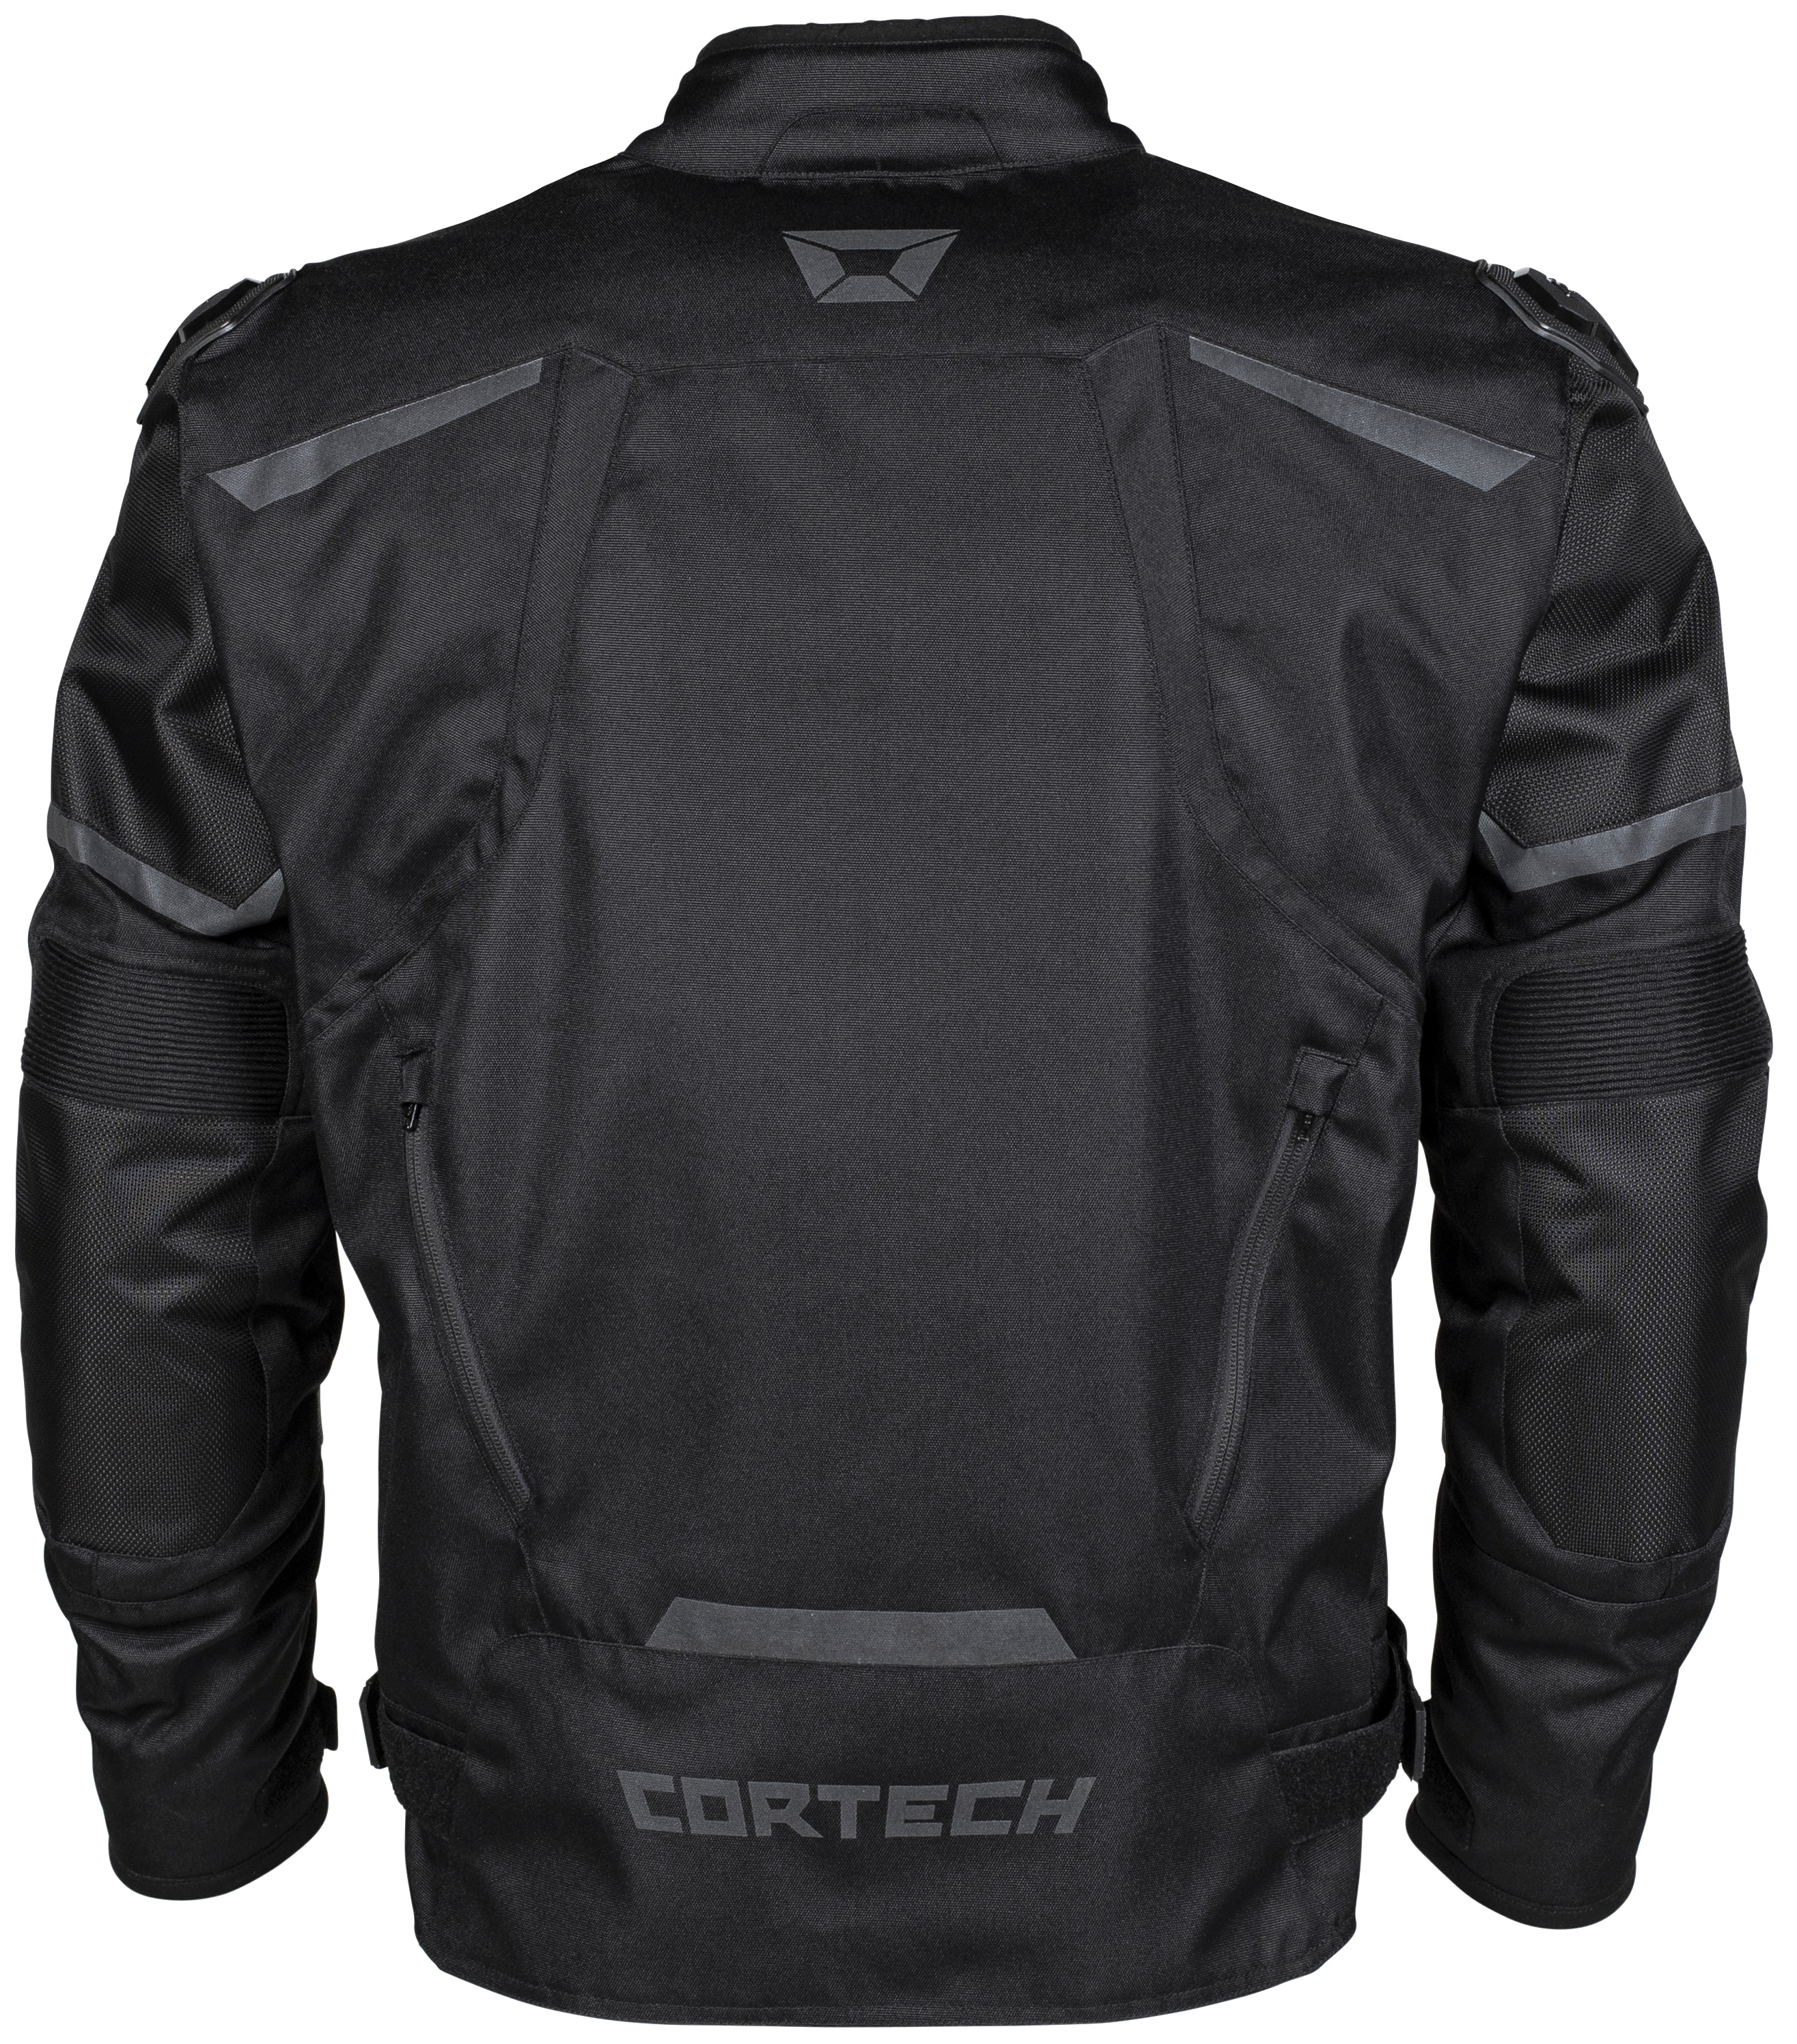 Hyper-Tec Armored Motorcycle Riding Jacket Black 2XL-Tall - Click Image to Close